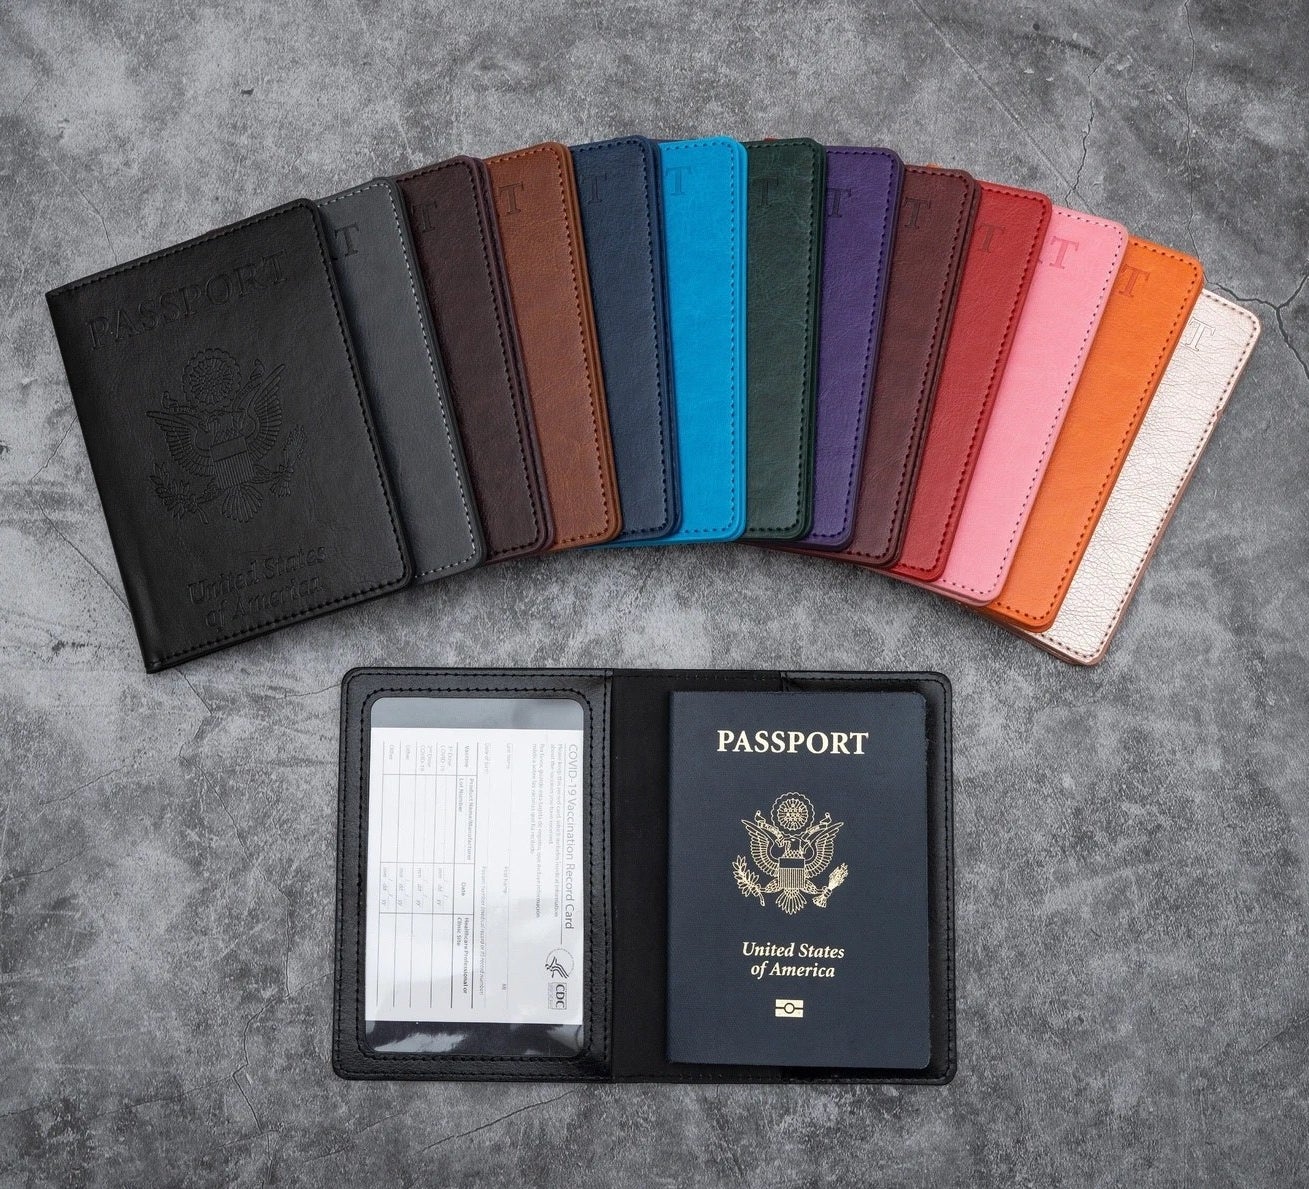 the colorful passport holders fanned out above an open one that&#x27;s holding a vaccination card and passport